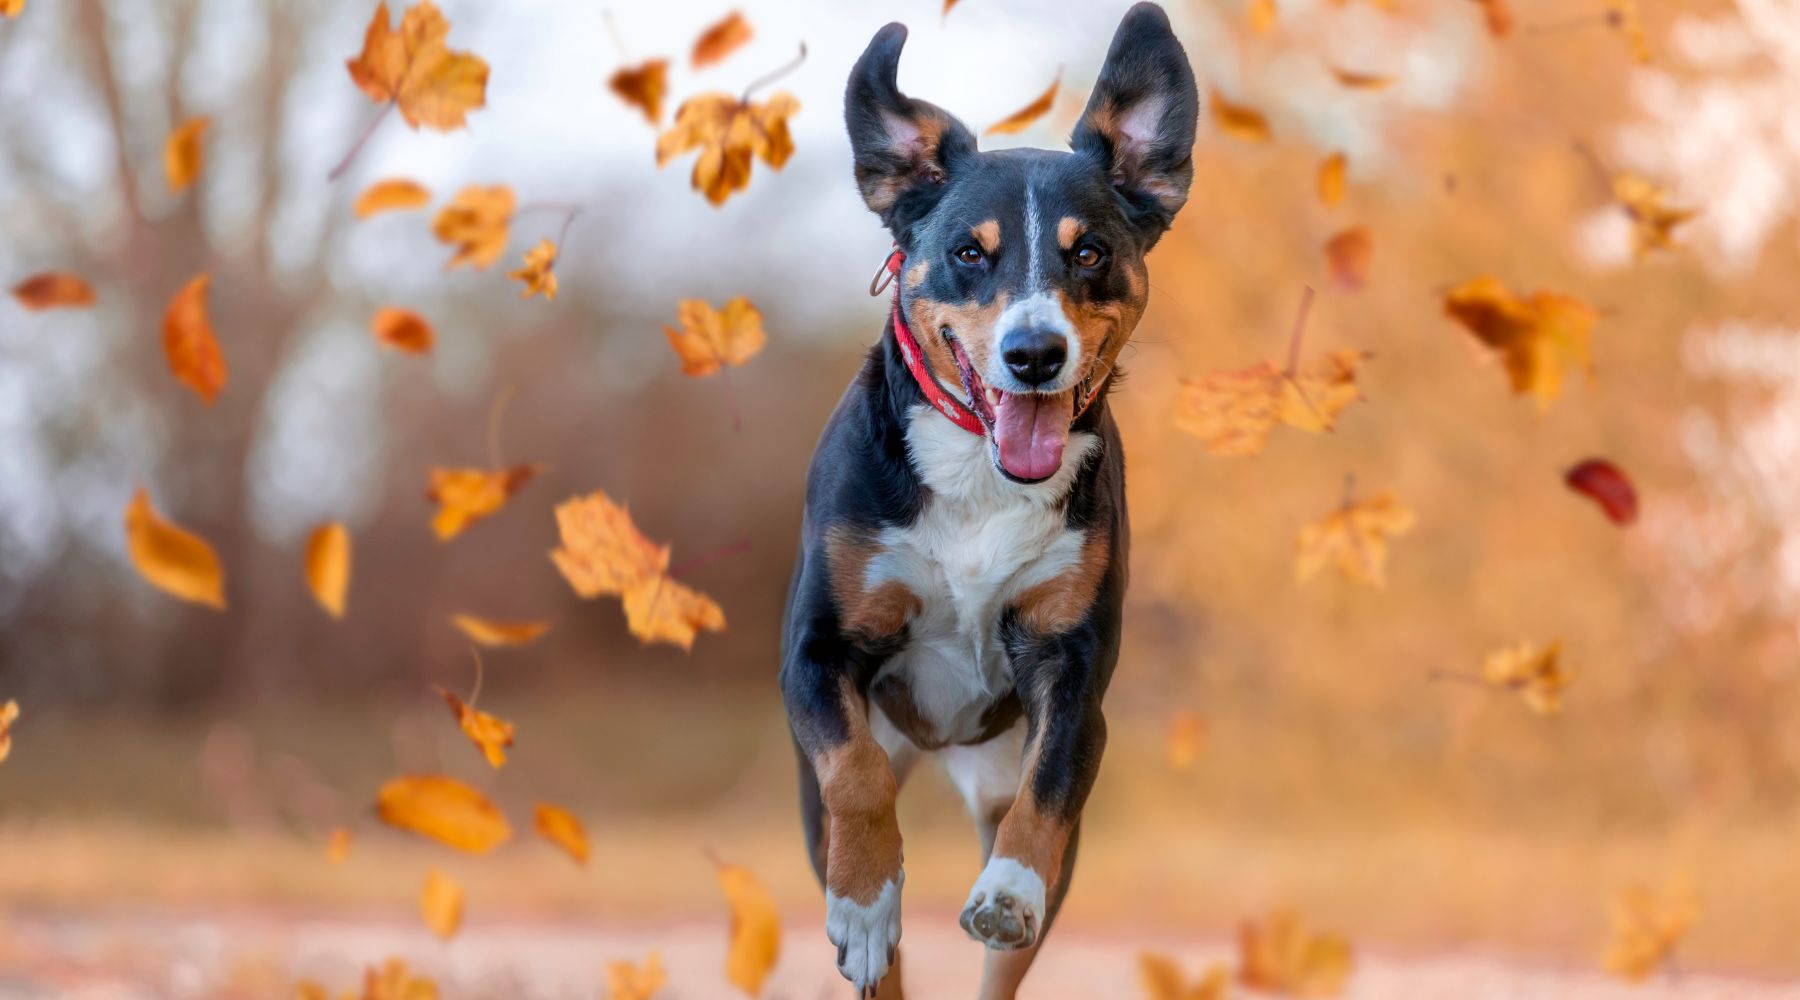 Dog running in fall with leaves falling